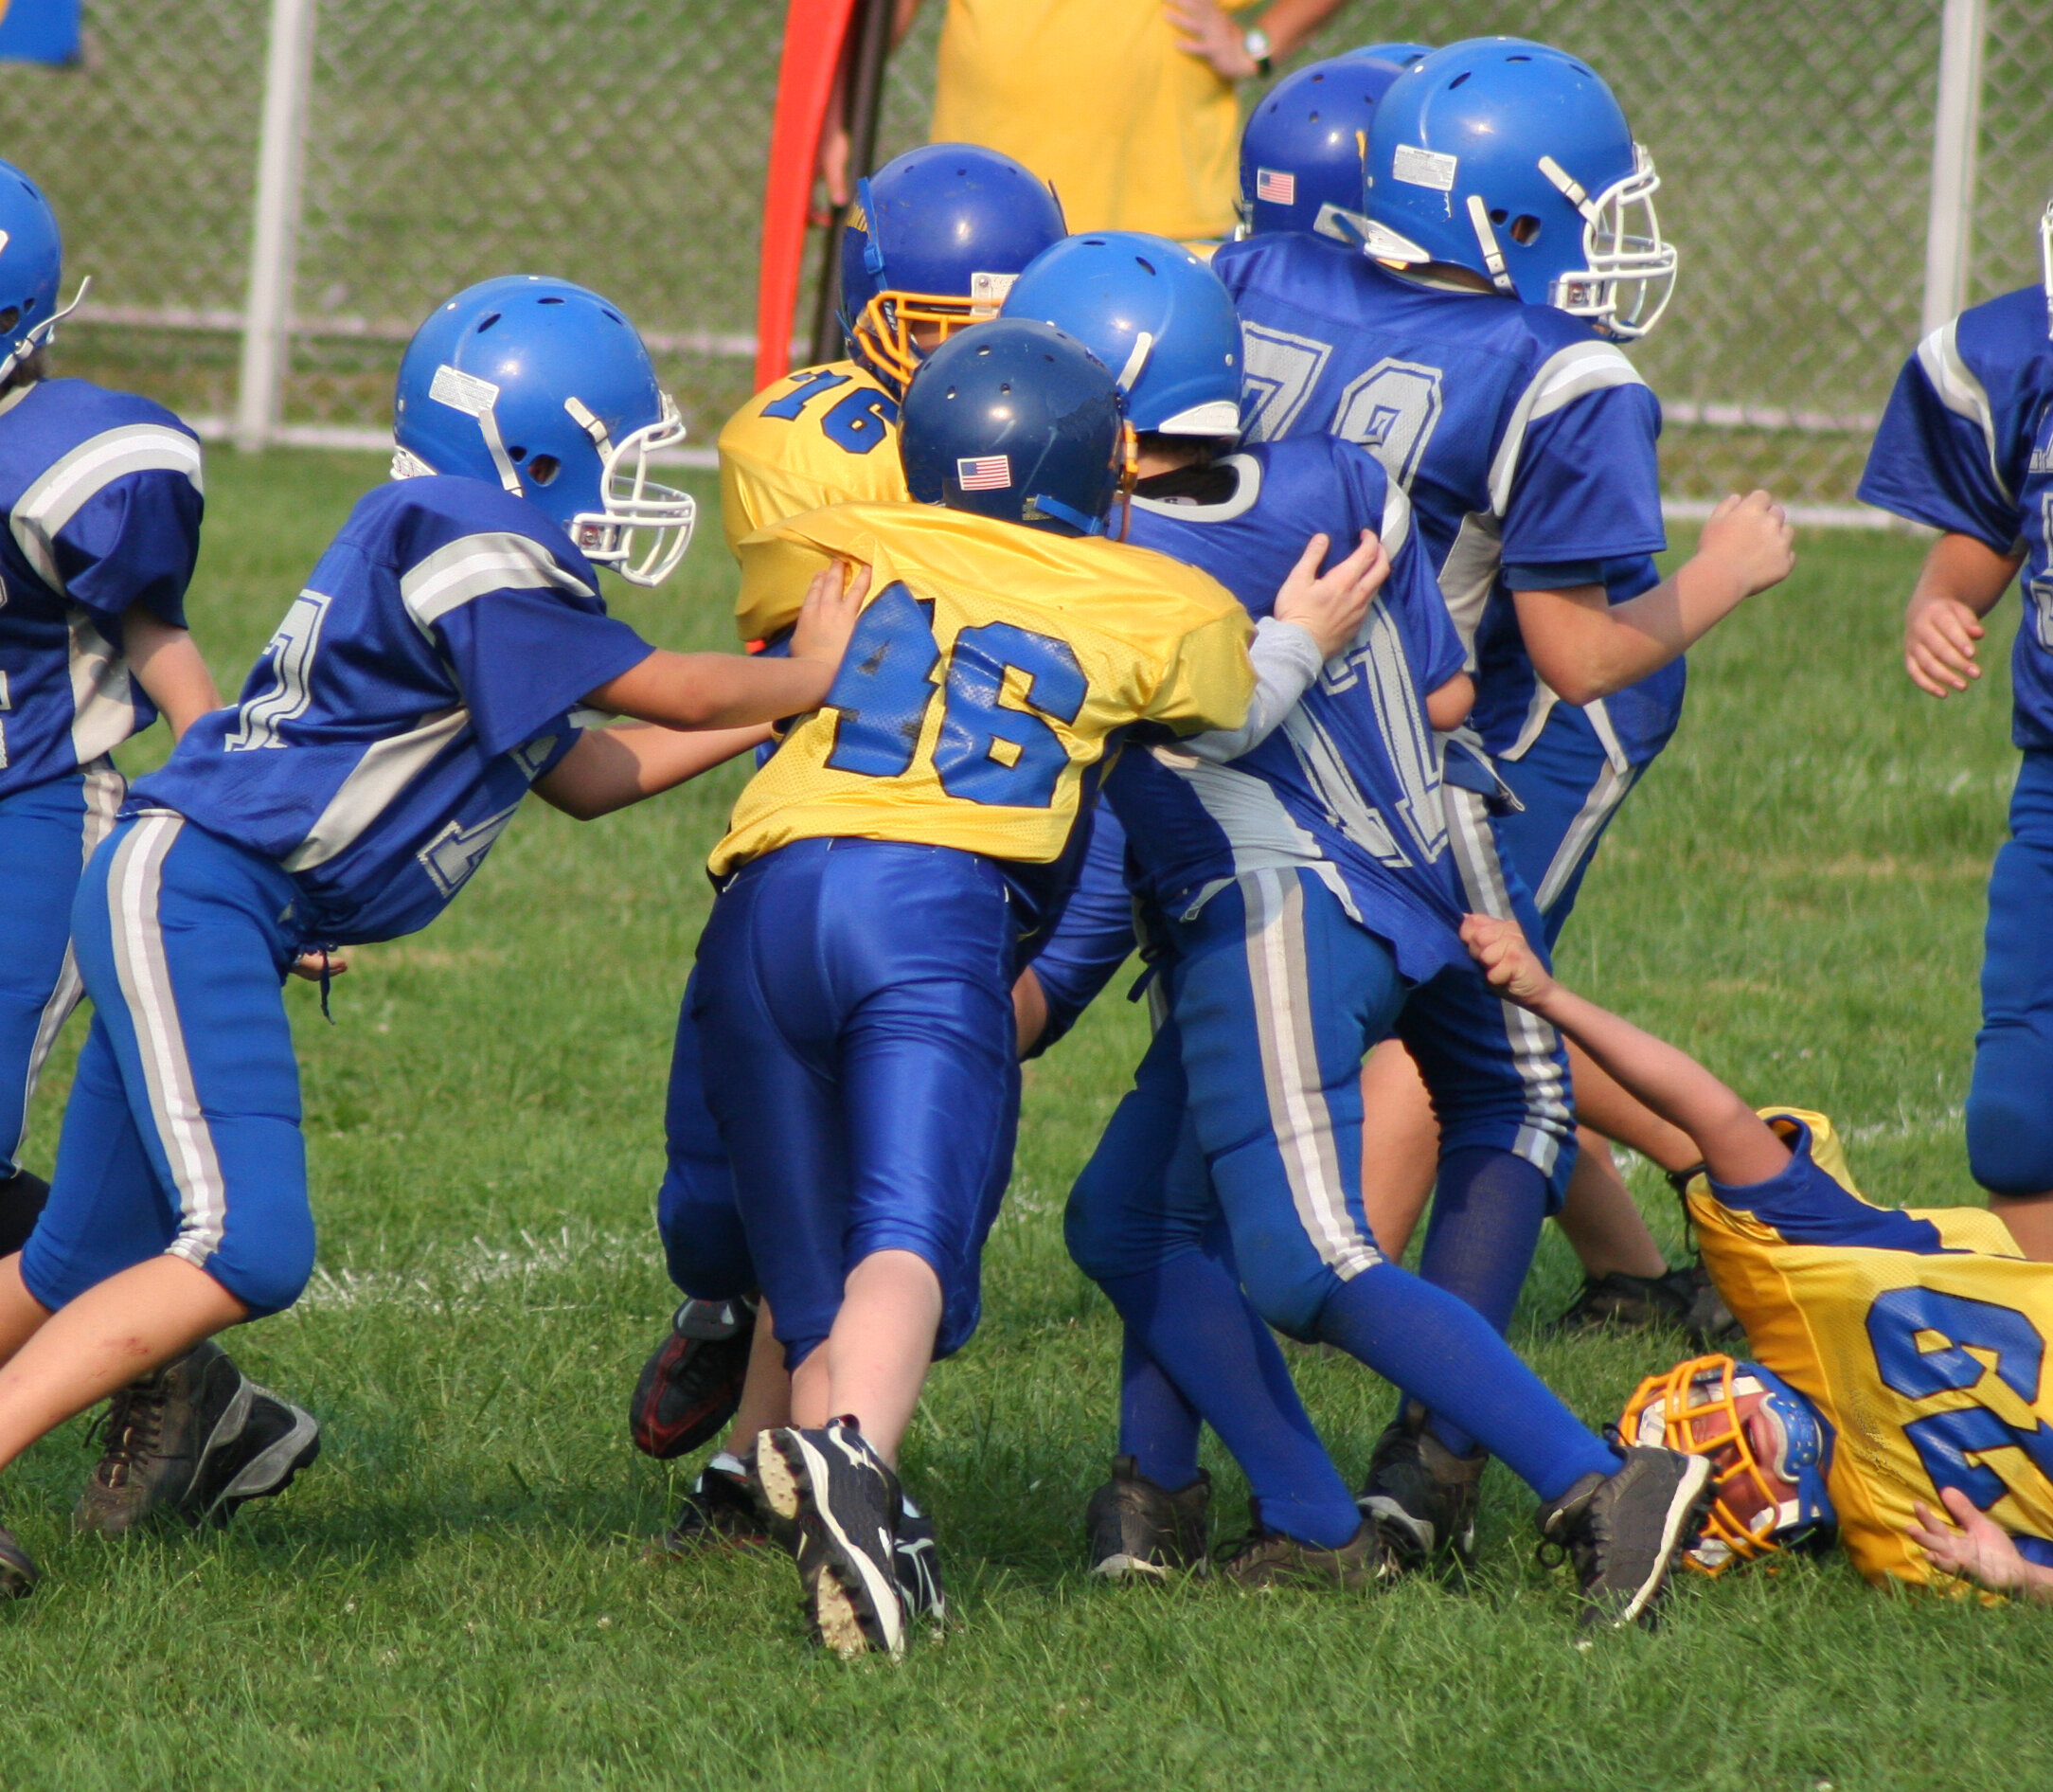 Study: Smaller subconcussive head impacts can accumulate over youth football season